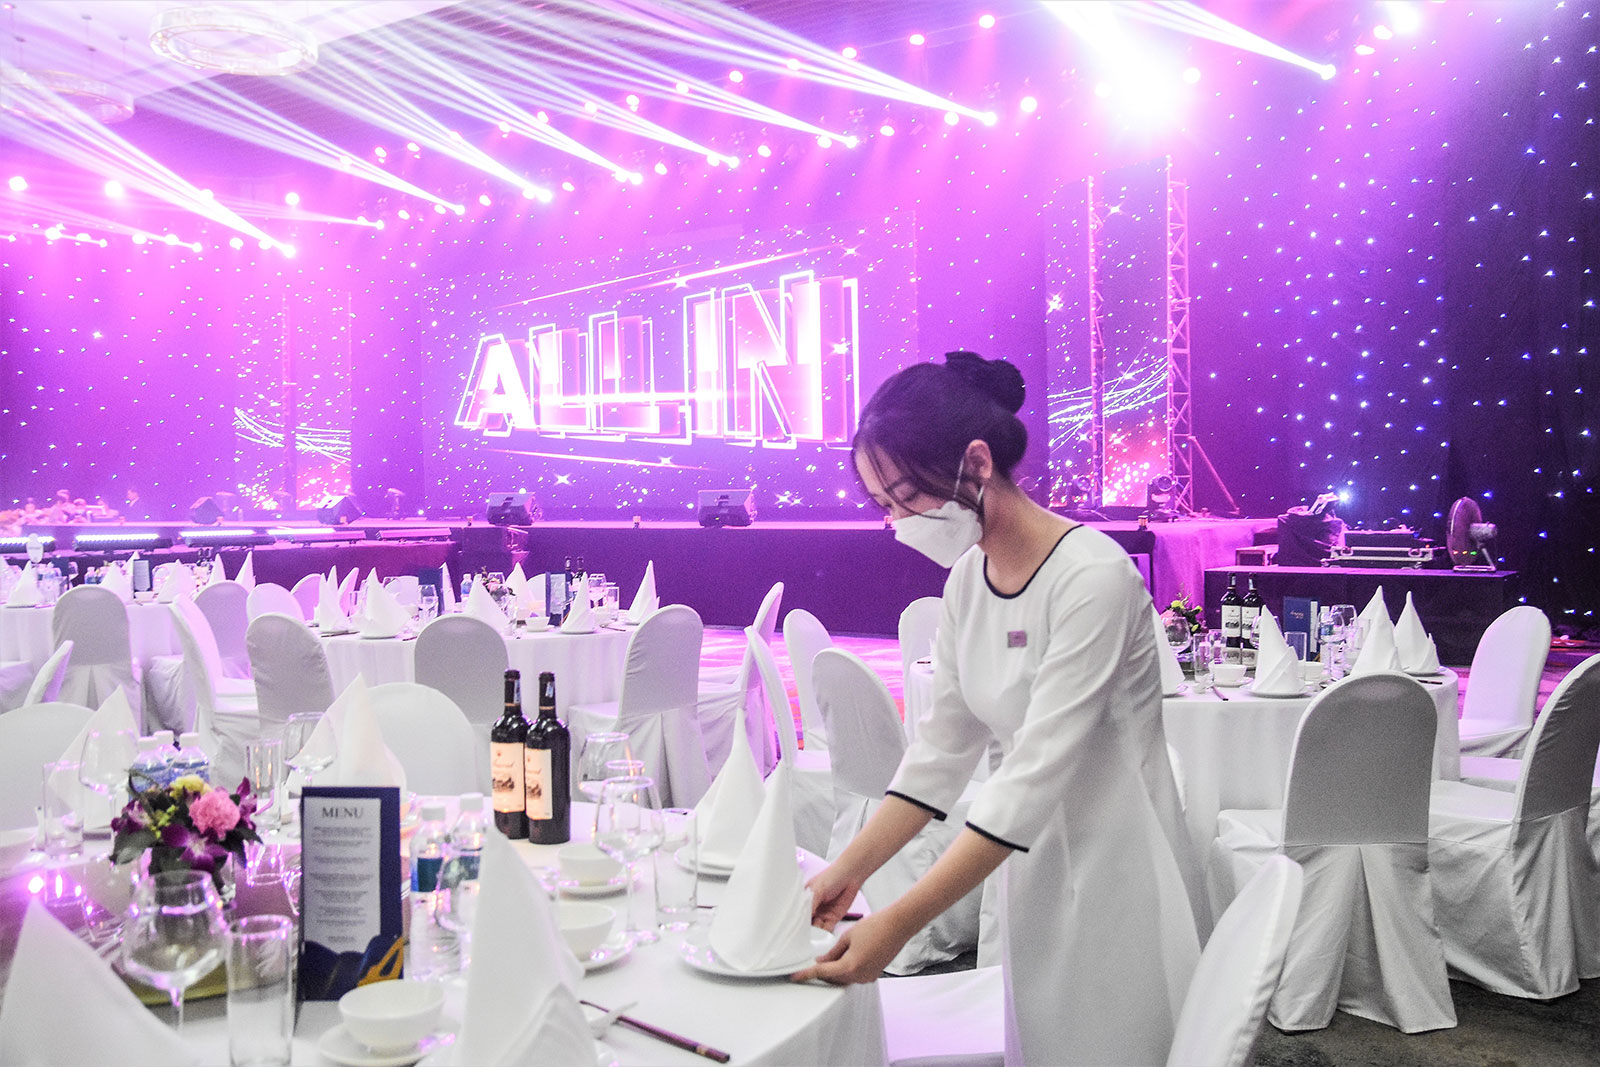 “MB AGEAS ORANIZED EVENT “ALL IN – IN IT TO WIN IT” WITH MORE THAN 500 GUESTS